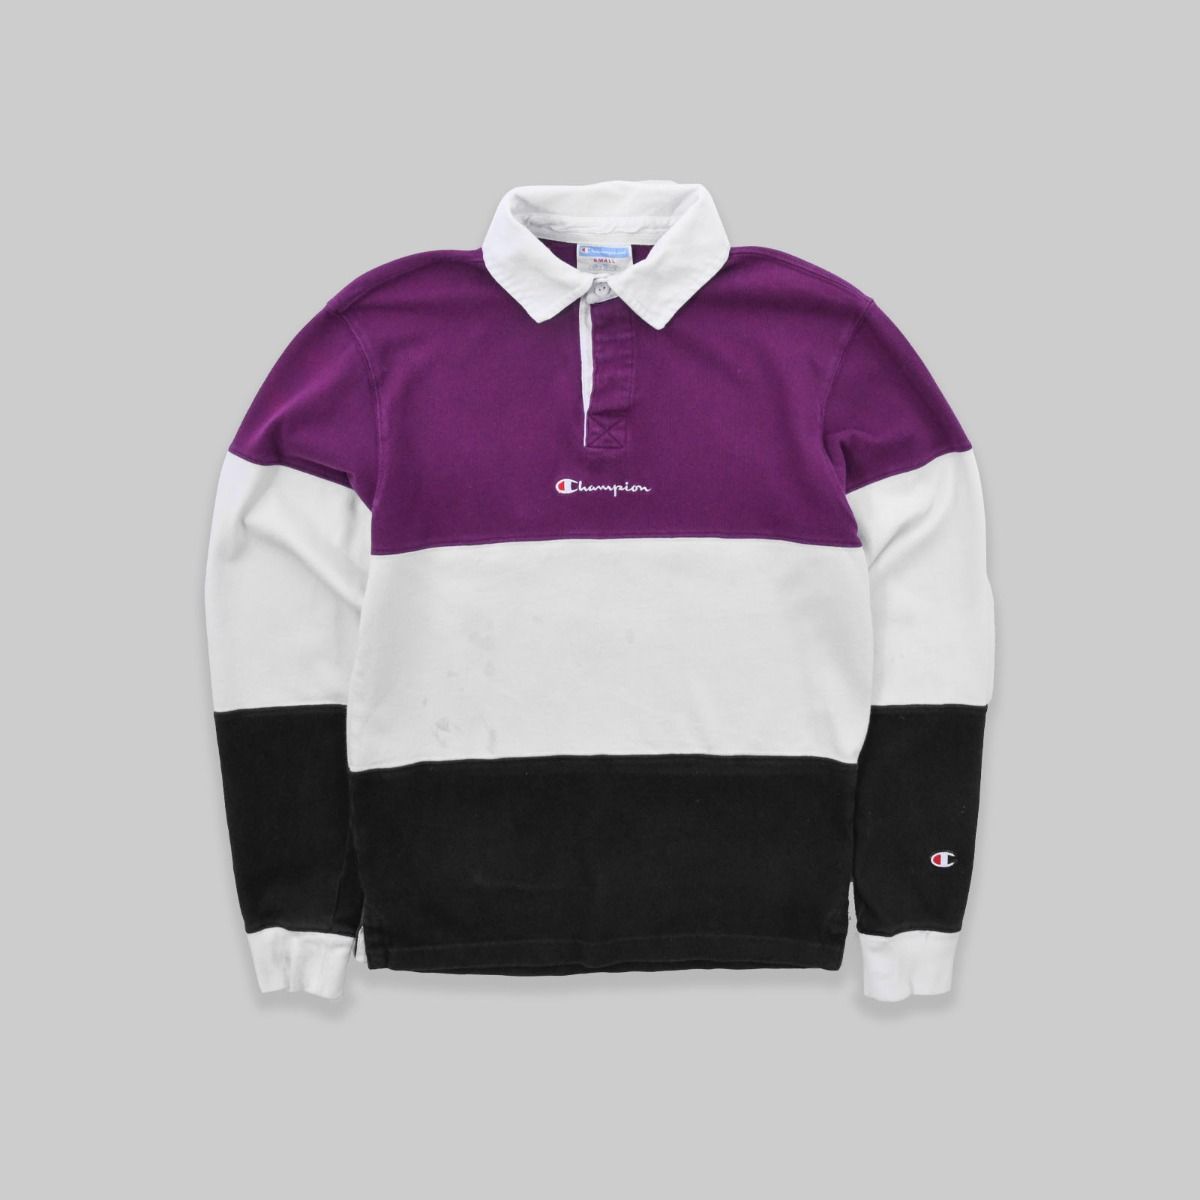 Champion 1990s Rugby Shirt